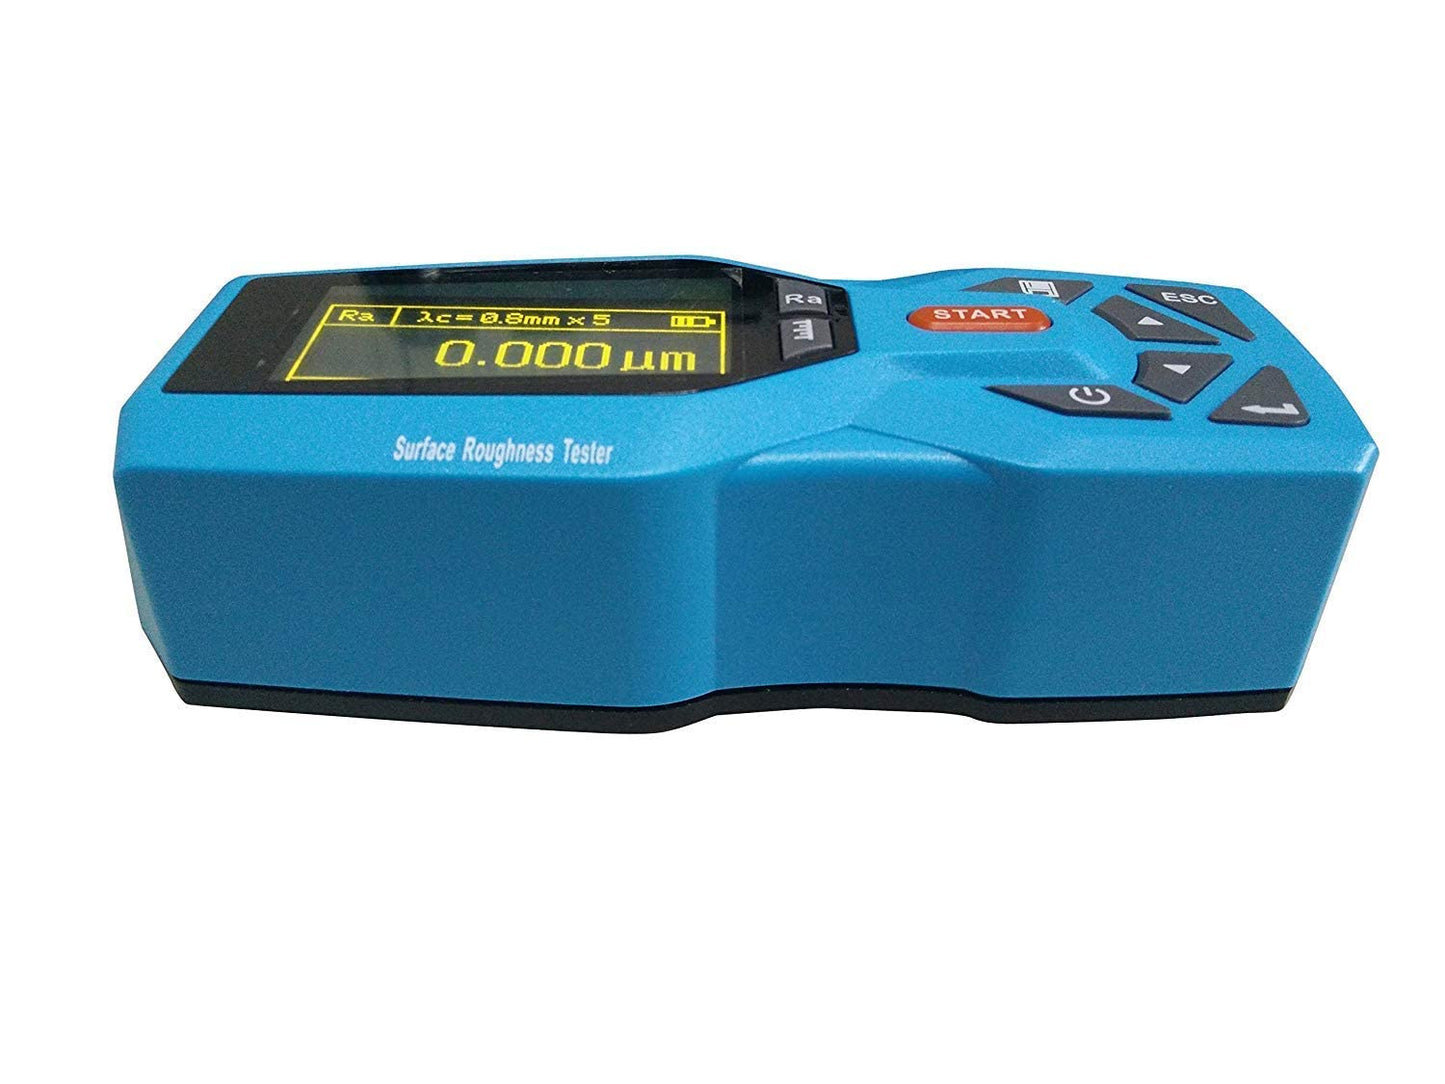 VTSYIQI Digital Surface Roughness Tester Meter Portable Surface Profilometer Profile Gauge Instruments Surftest with 20 Parameters Range Ra Rz Real-time Clock Settings and Display